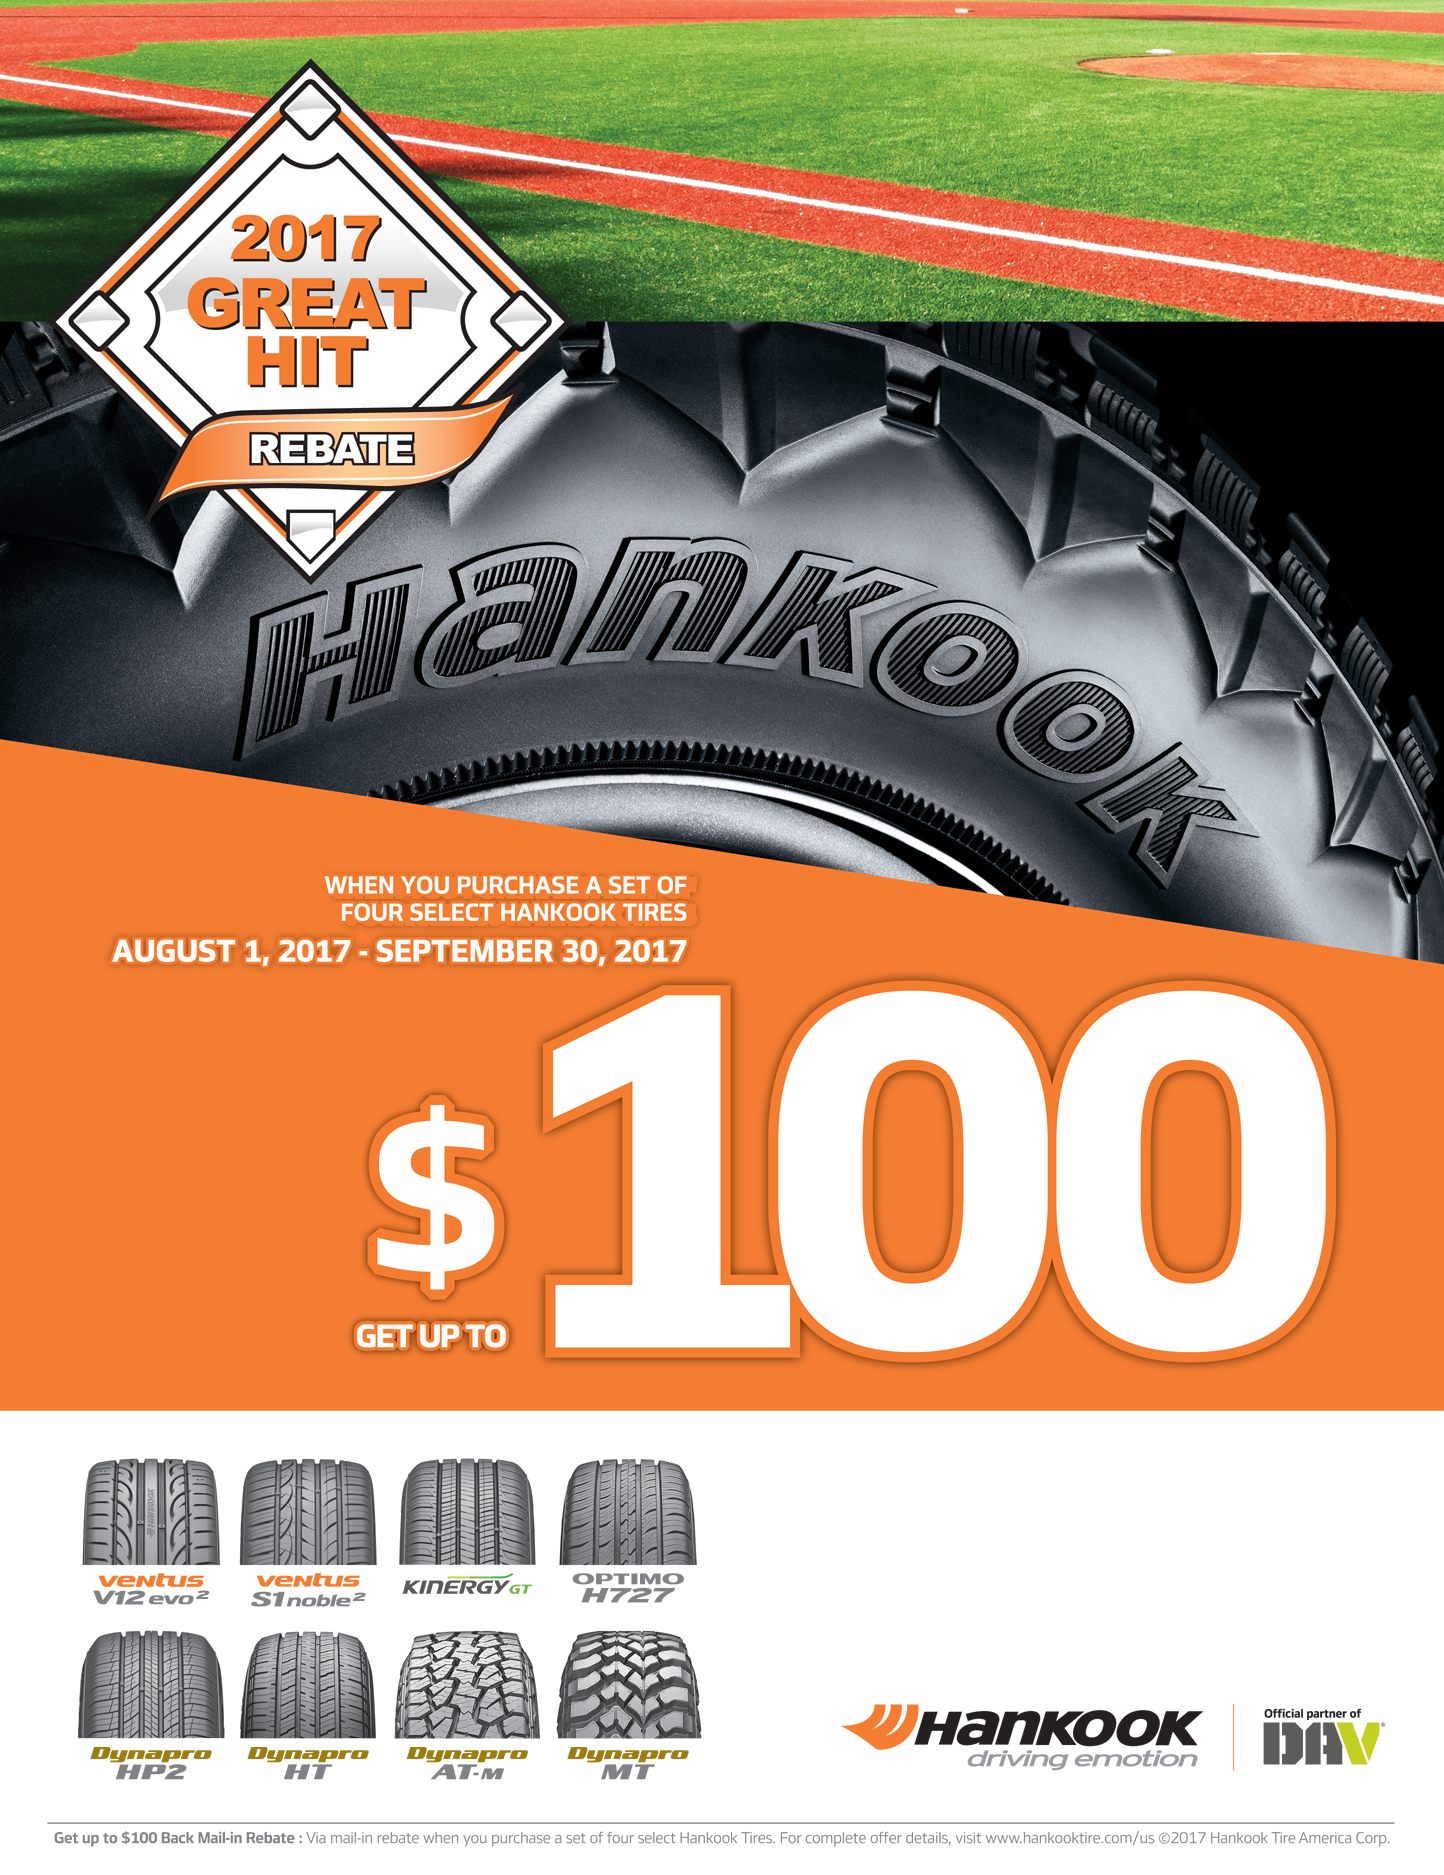 hankook-tire-unveils-new-rebate-promotion-tire-review-magazine